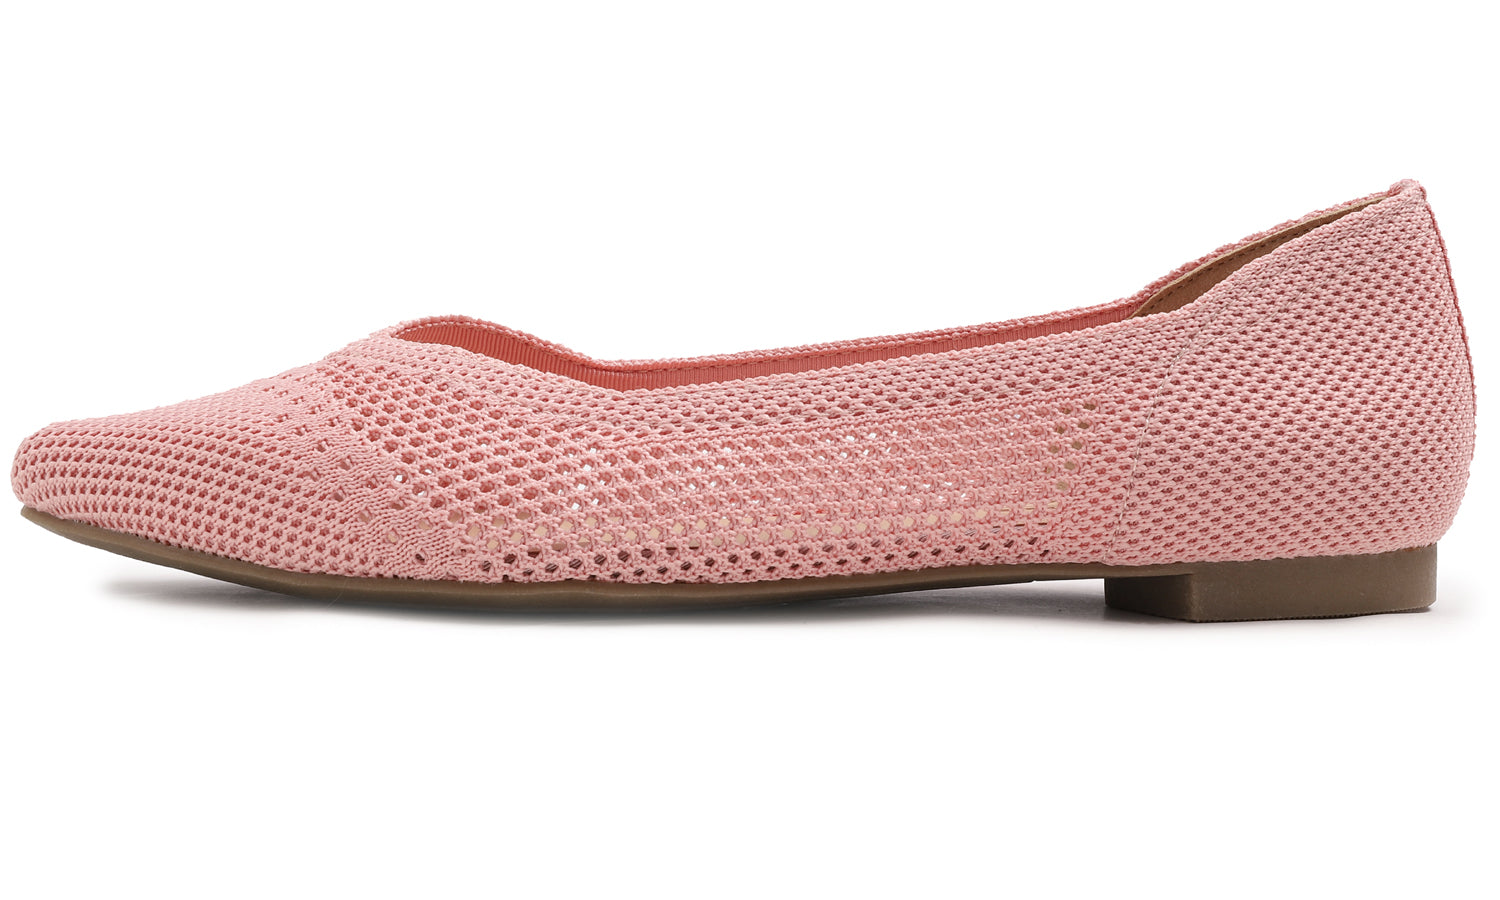 Feversole Women's Woven Fashion Breathable Knit Flat Shoes Pointed Pink